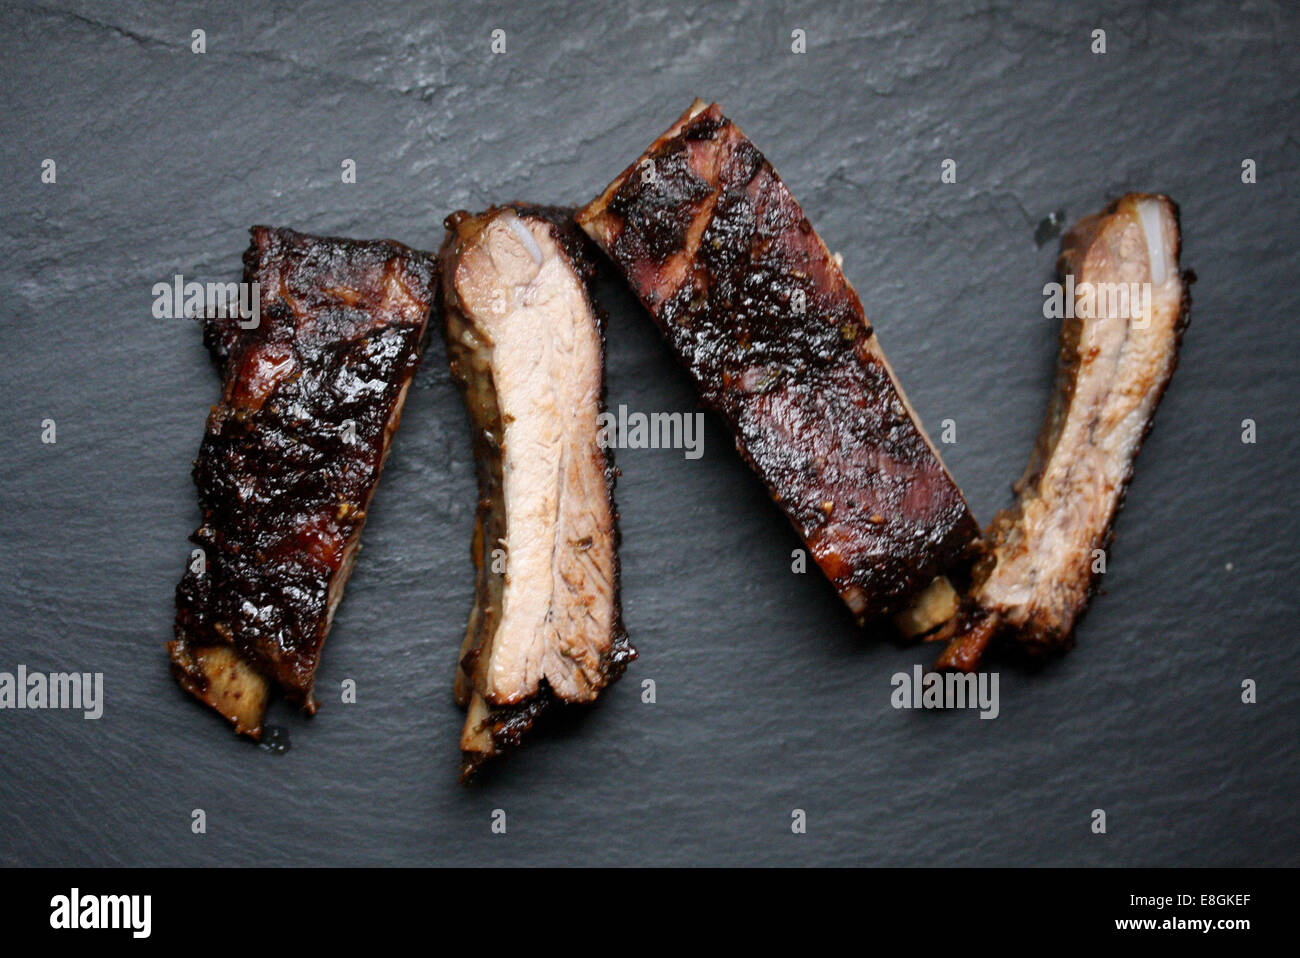 Oven baked pork ribs with tex-mex bbq sauce Stock Photo